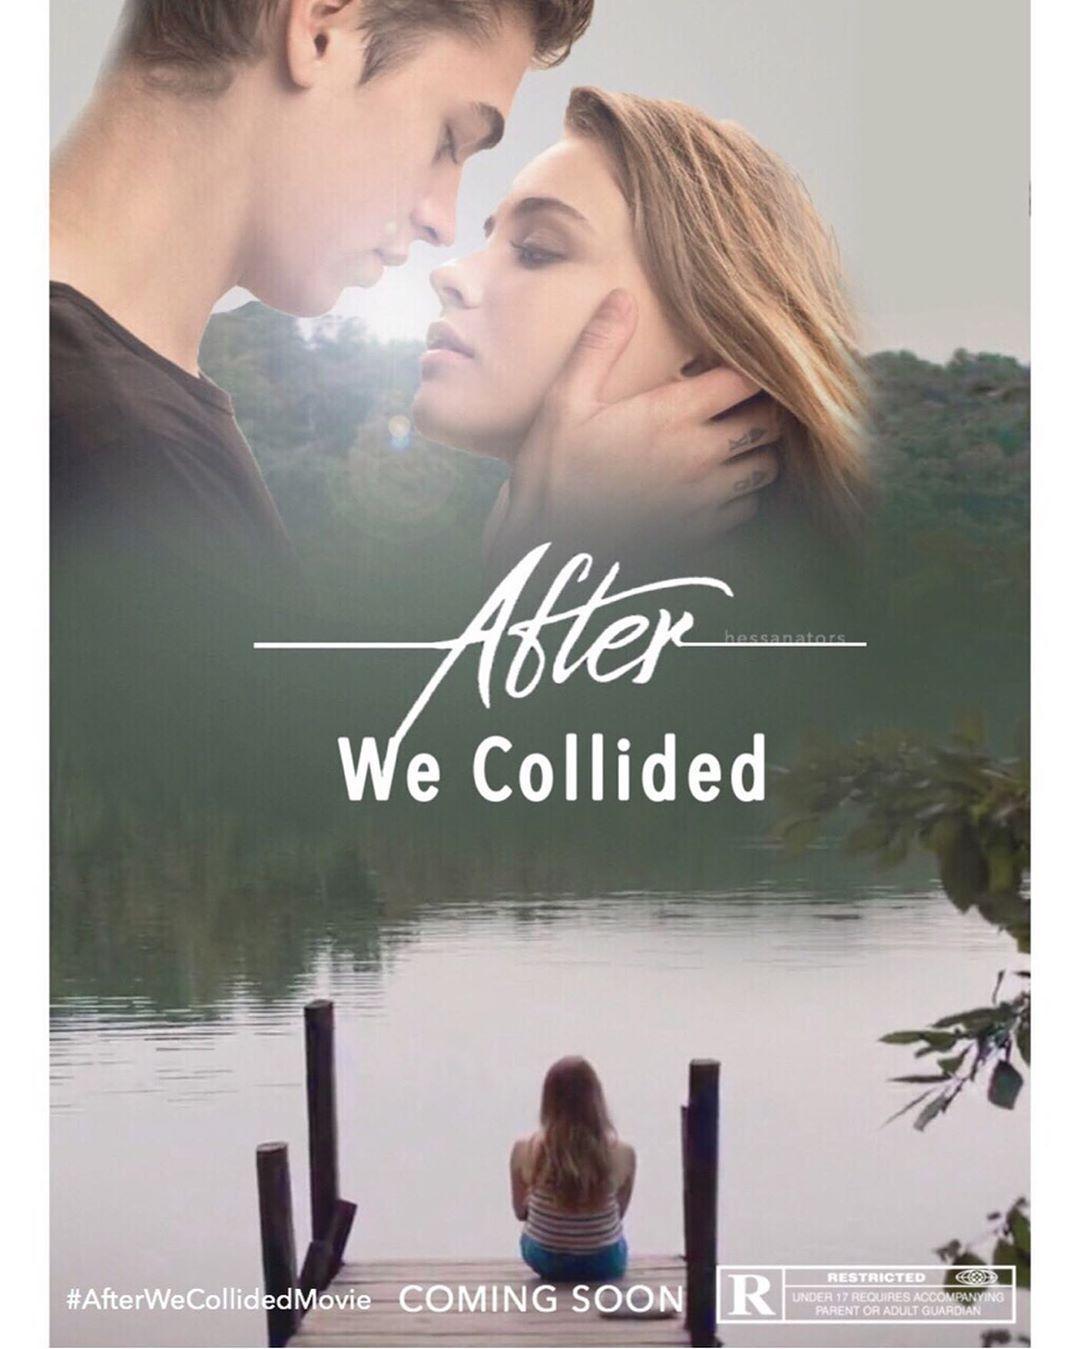 After Movie Updates on Instagram: “AFTER We Collided poster